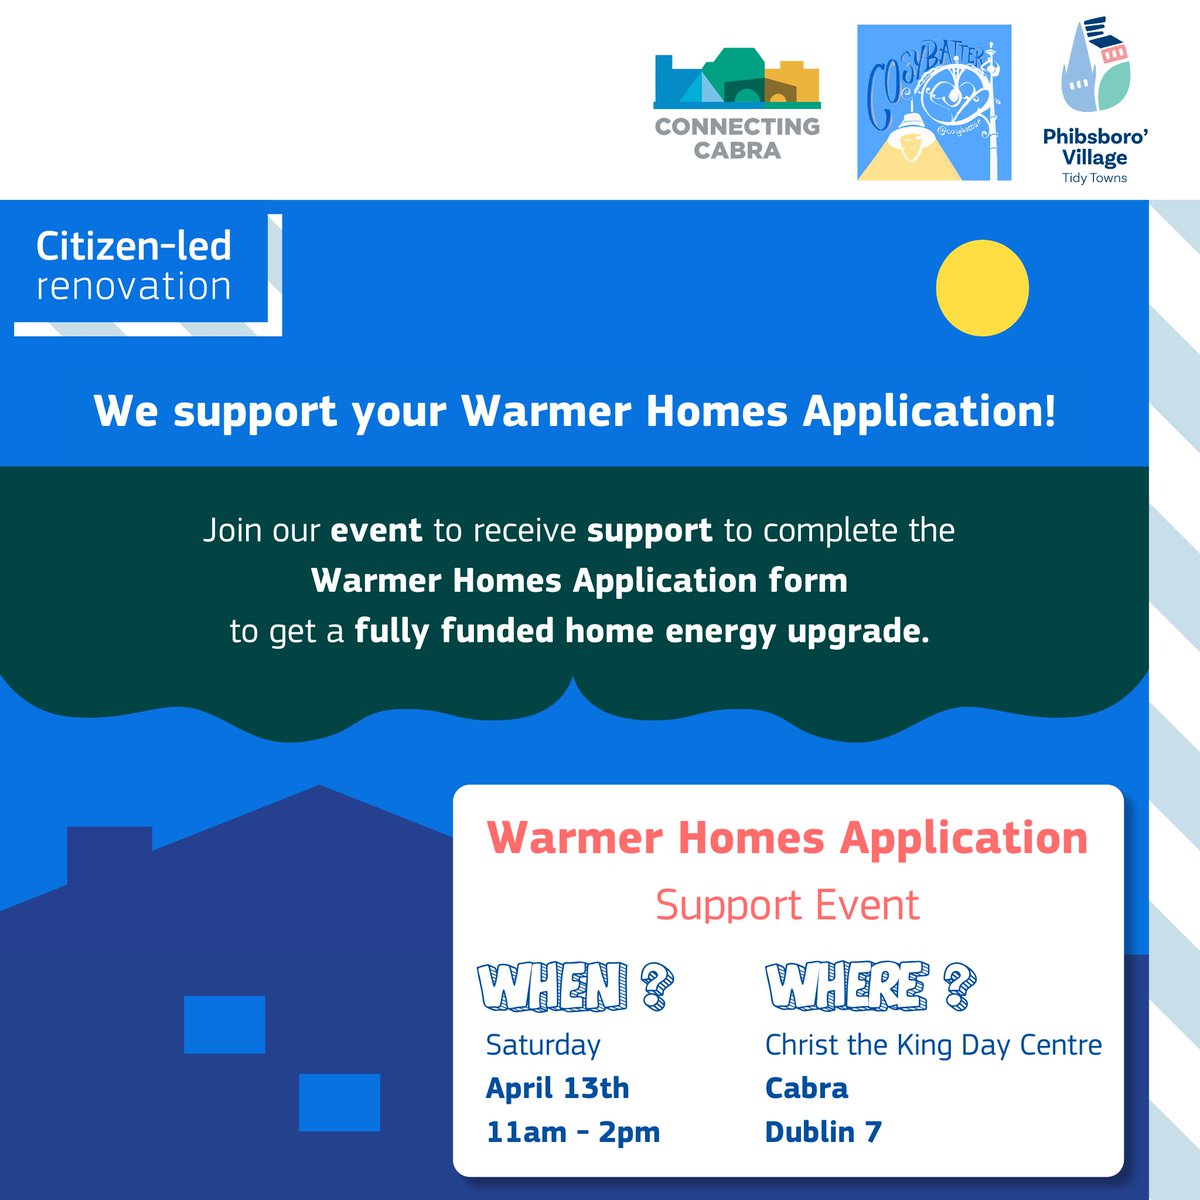 Free event: Warmer Homes Application Support — to guide you through the process of applying for an energy upgrade with experts on hand to help. Date: Saturday, April 13th Time: 11:00 AM - 2:00 PM Location: Christ the King Day Centre, Cabra, Dublin 7. phibsborovillage.com/post/warmer-ho…